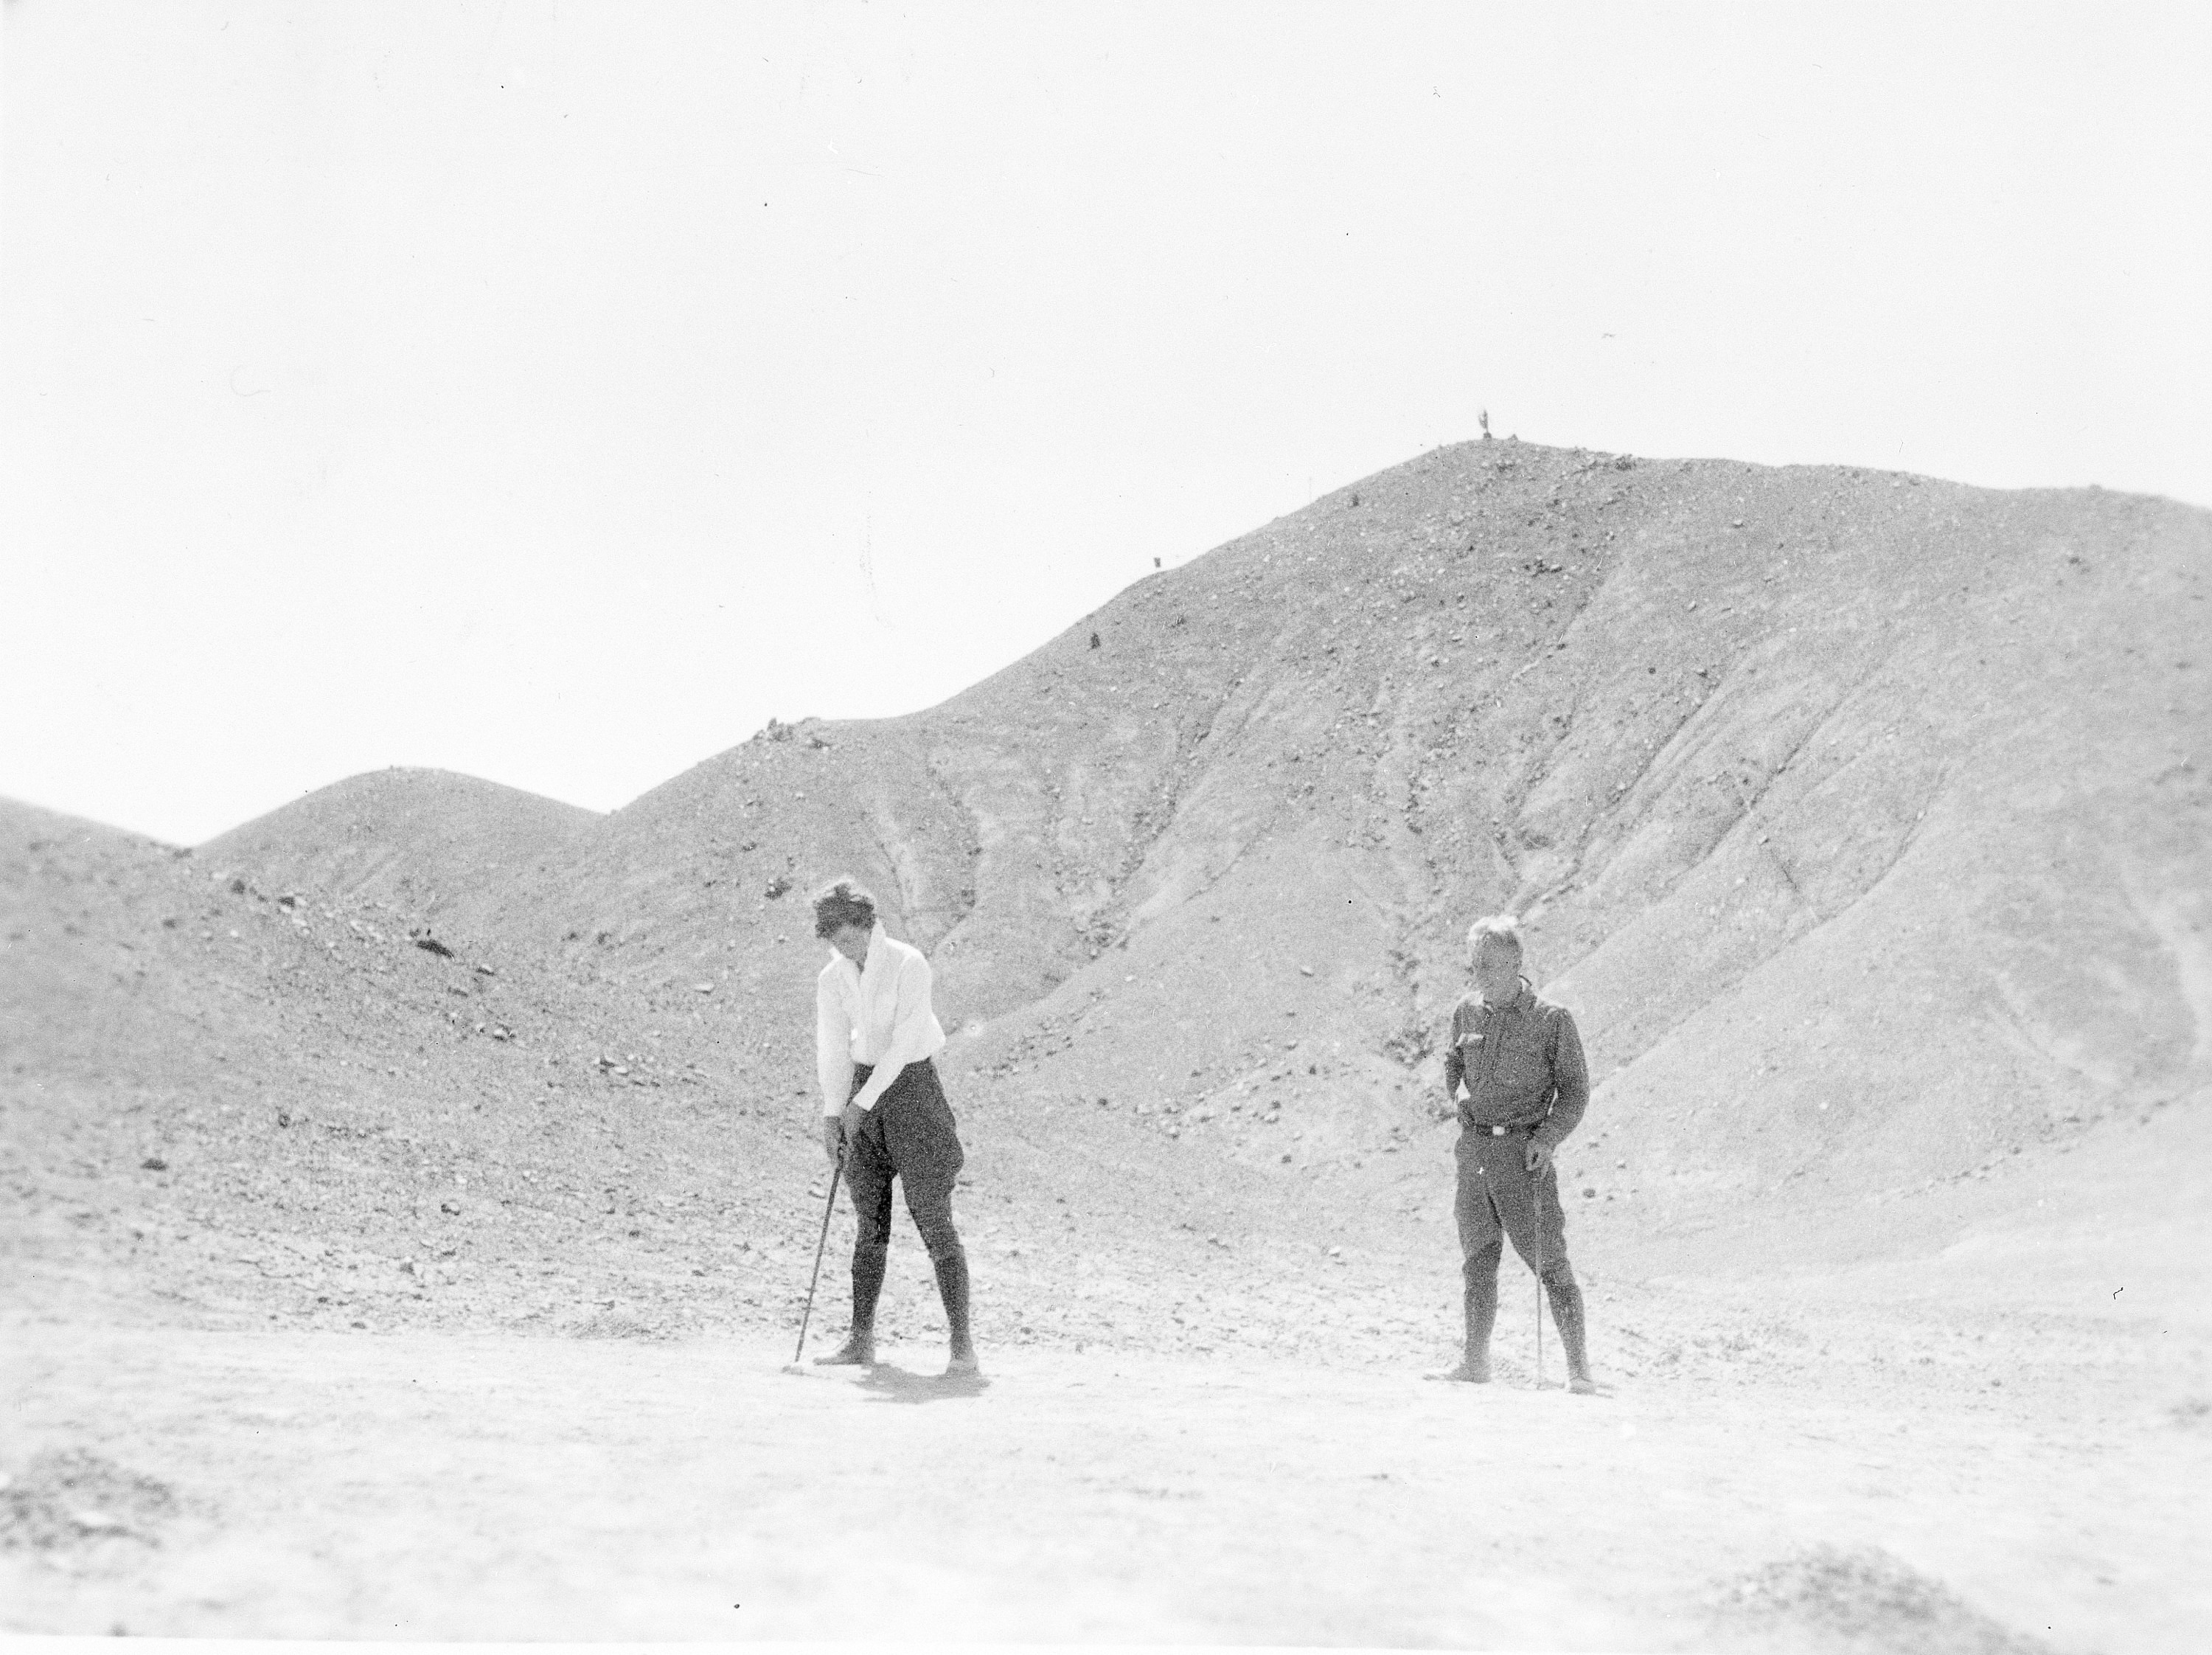 A man and woman stands outdoors in a rocky area. Both are holding the golf clubs and the woman is preparing to take a swing.